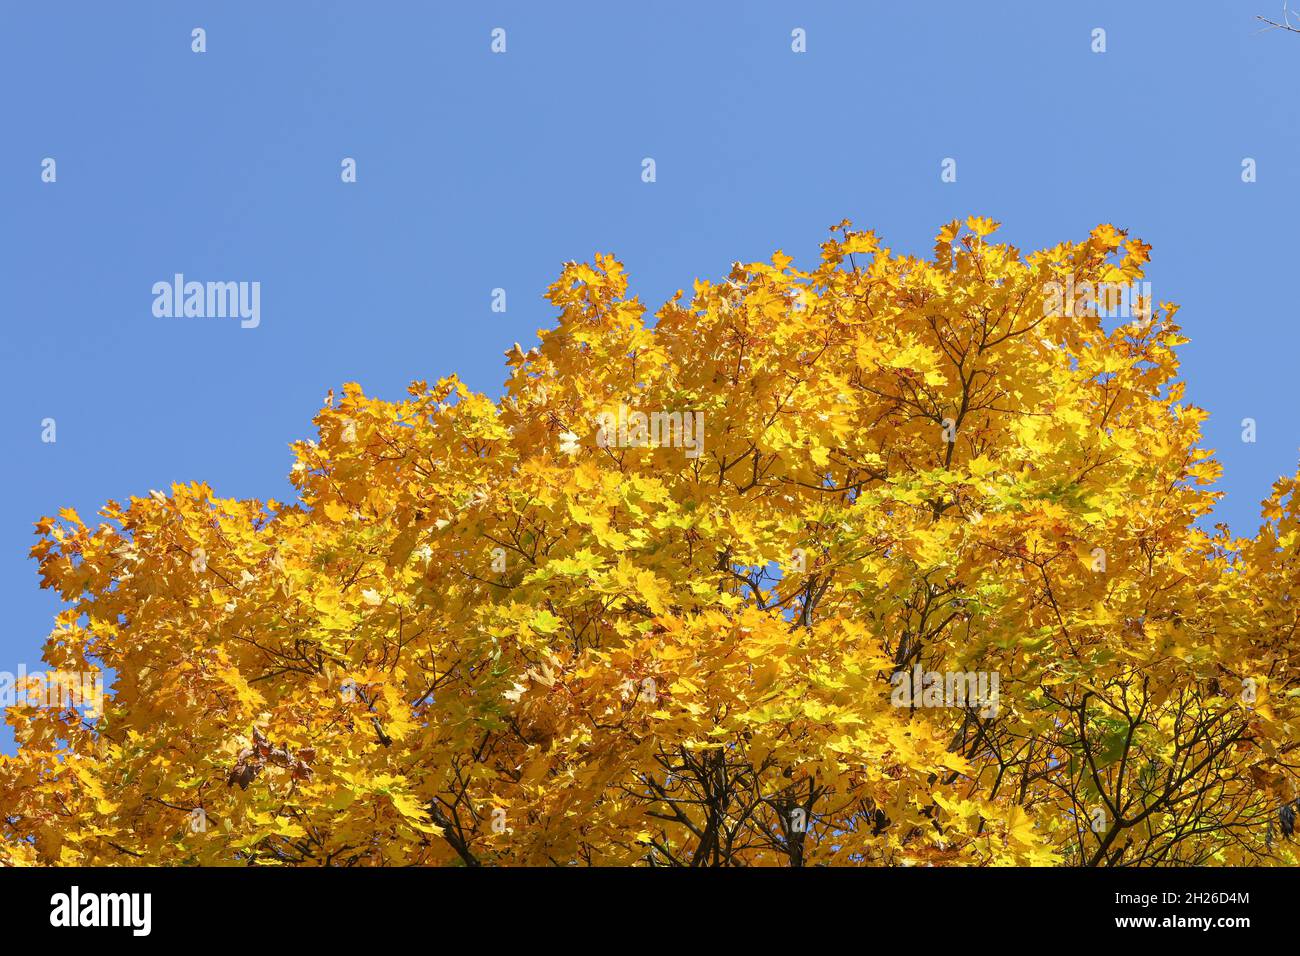 Yellow maple leaves or foliage on a blue sky background Stock Photo